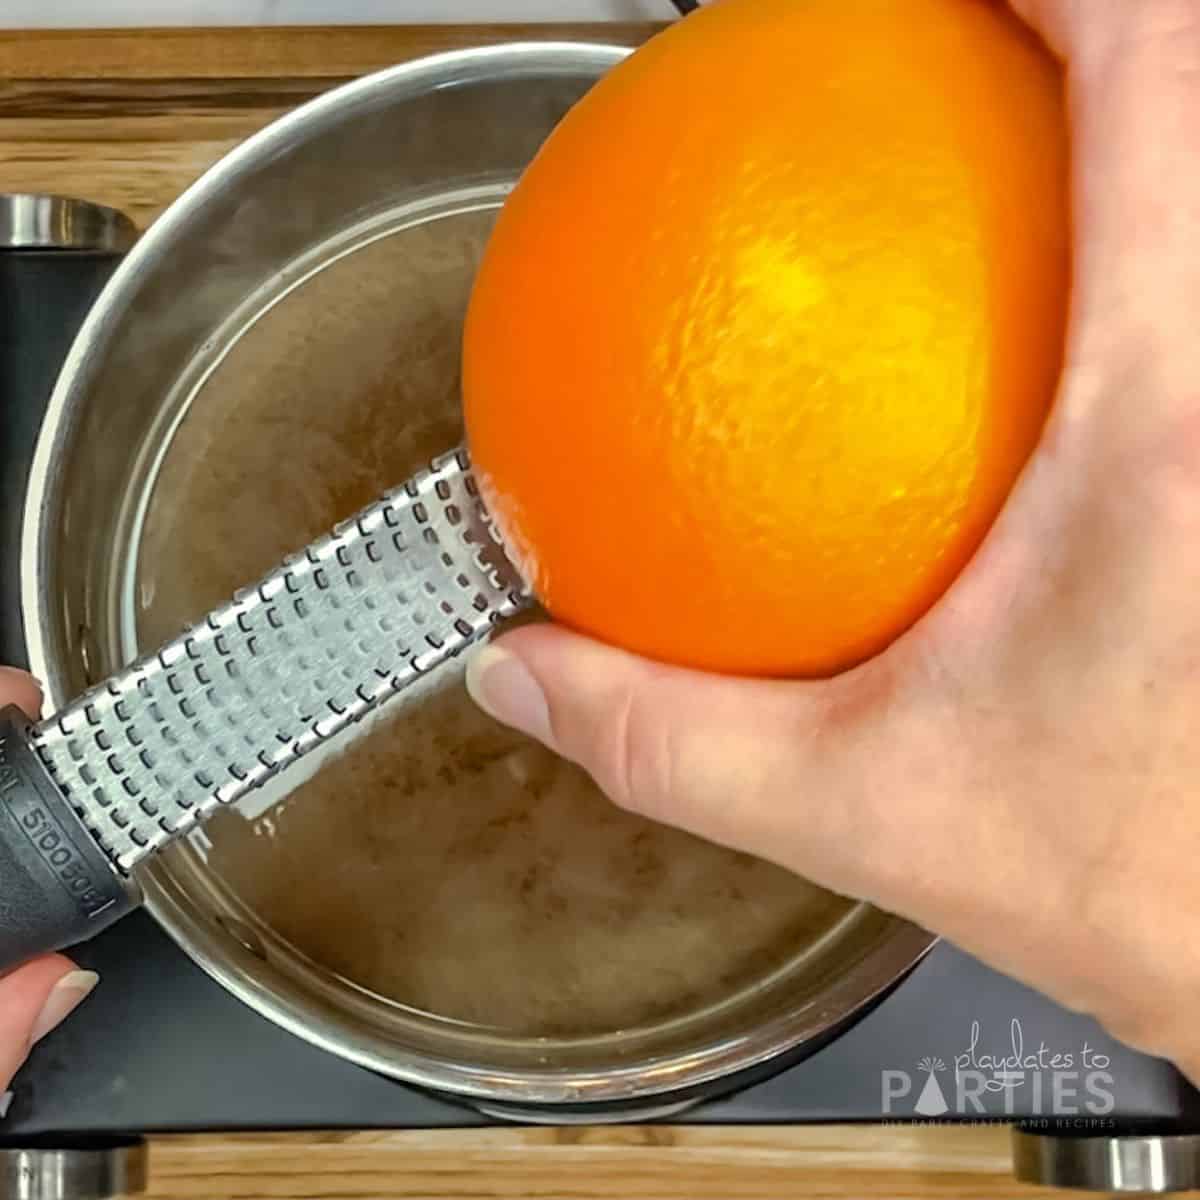 A woman's hand using a microplane to zest an orange into a pot of liquid.